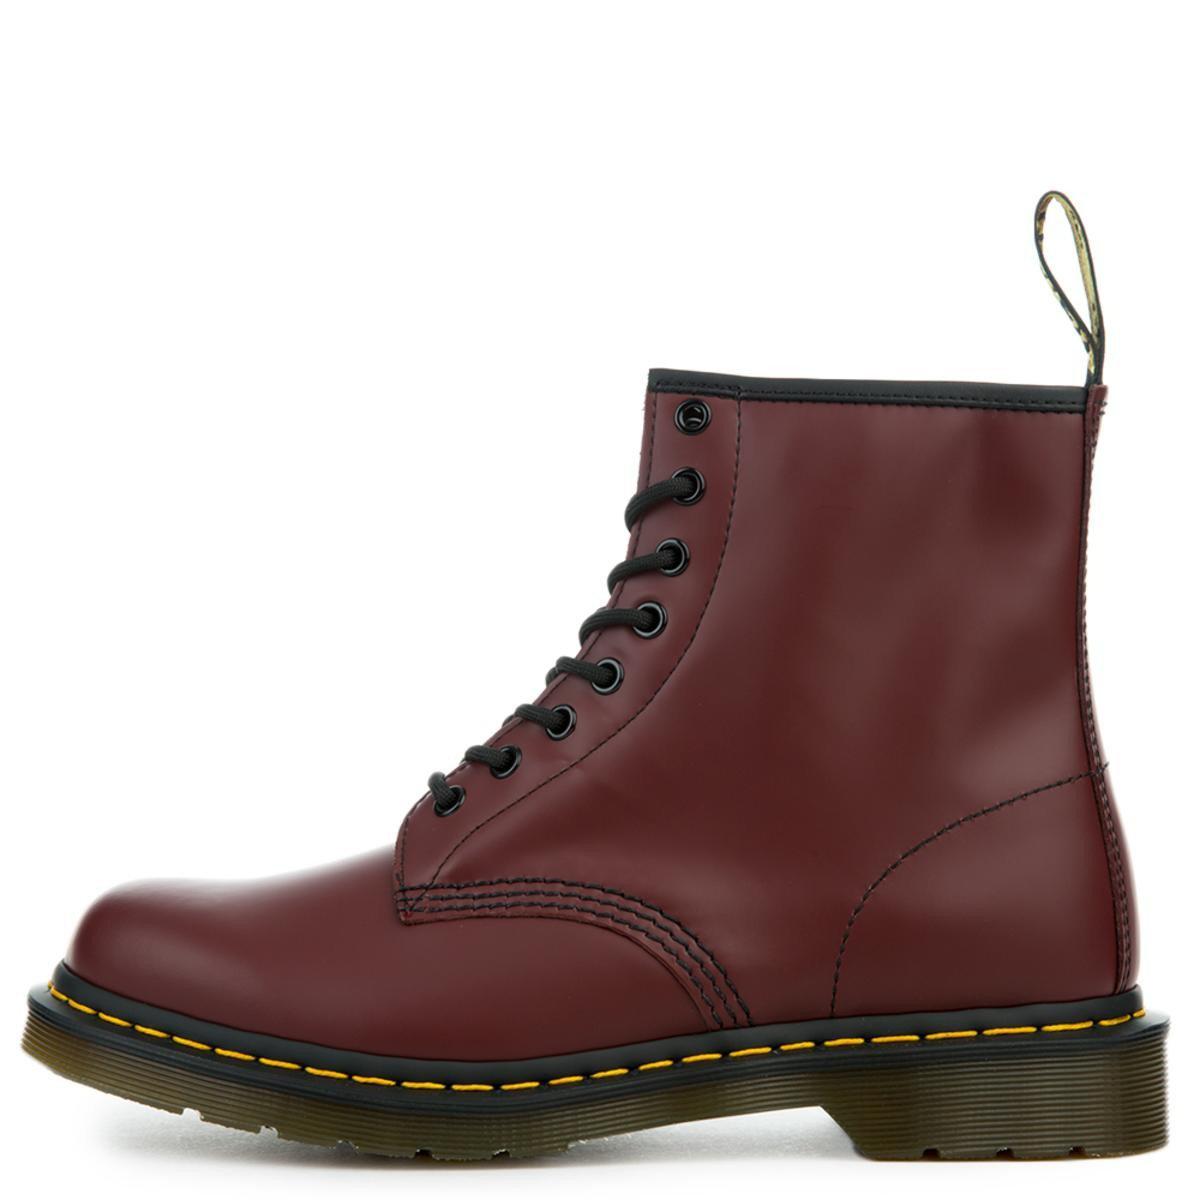 Lyst - Dr. Martens 1460 Nappa Leather Cherry Red Boots for Men